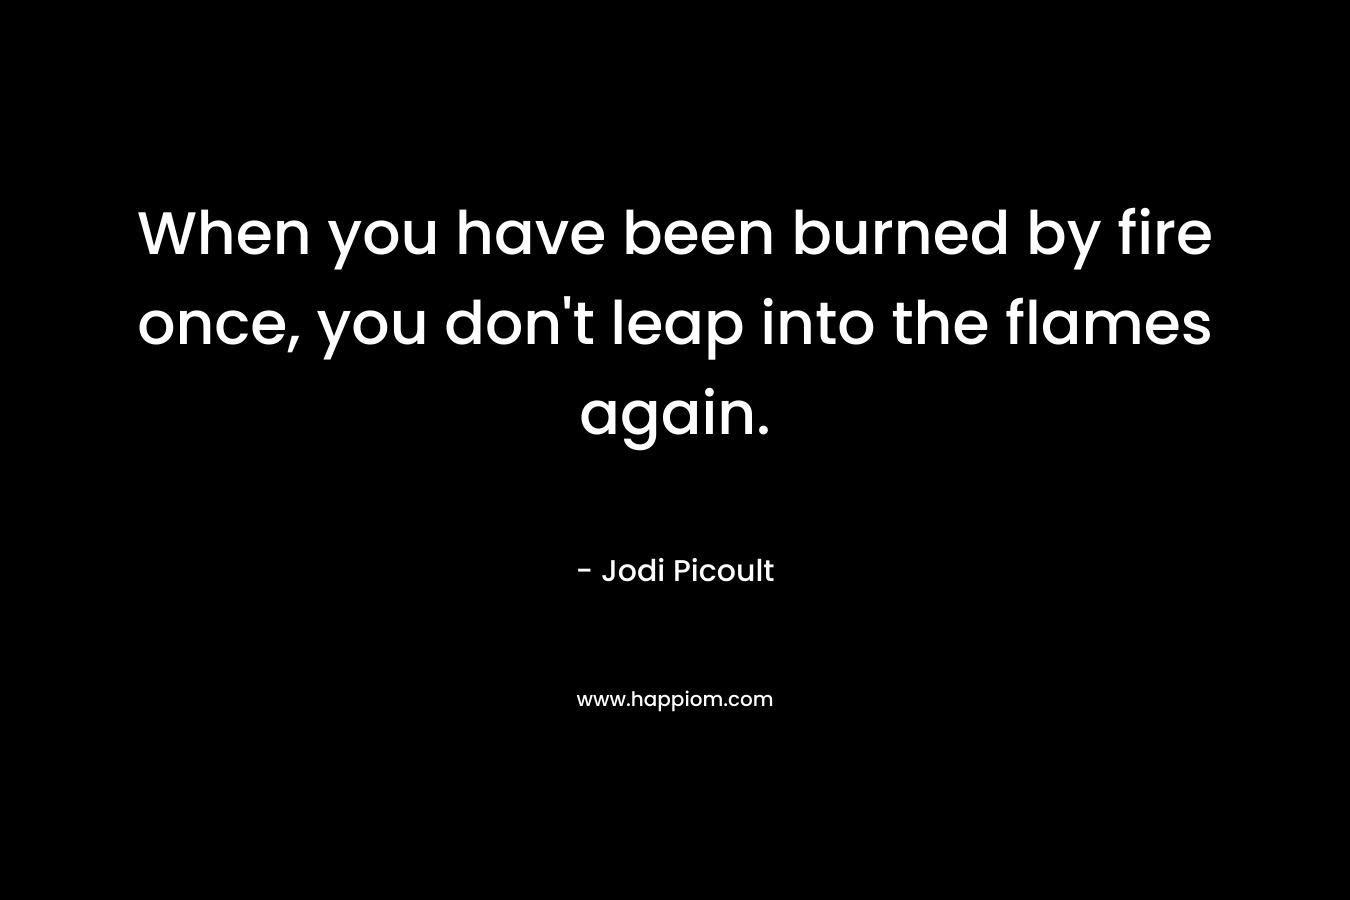 When you have been burned by fire once, you don’t leap into the flames again. – Jodi Picoult